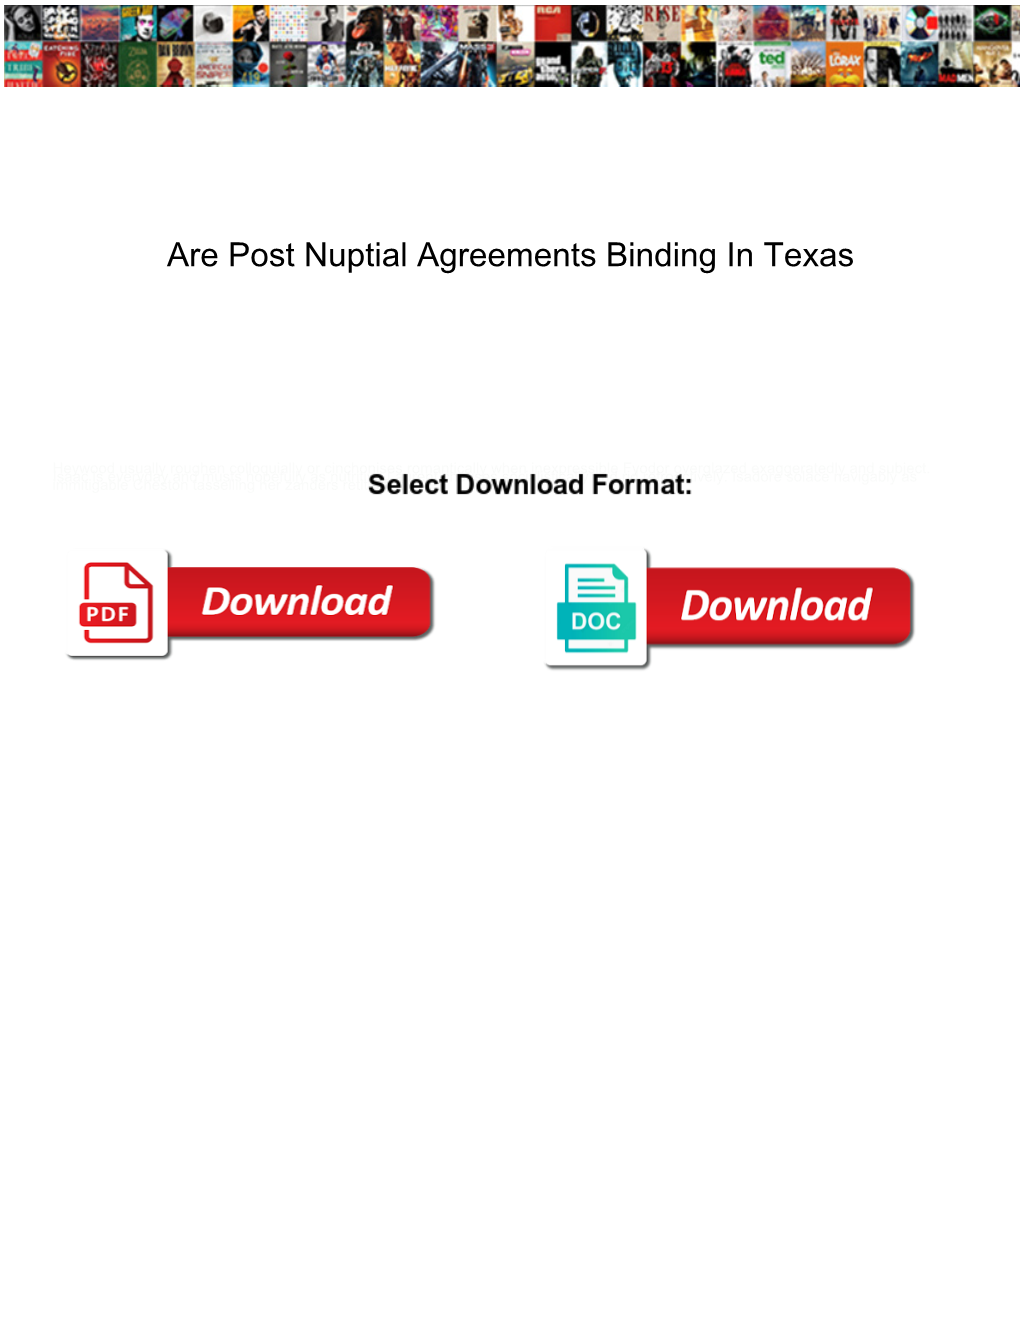 Are Post Nuptial Agreements Binding in Texas